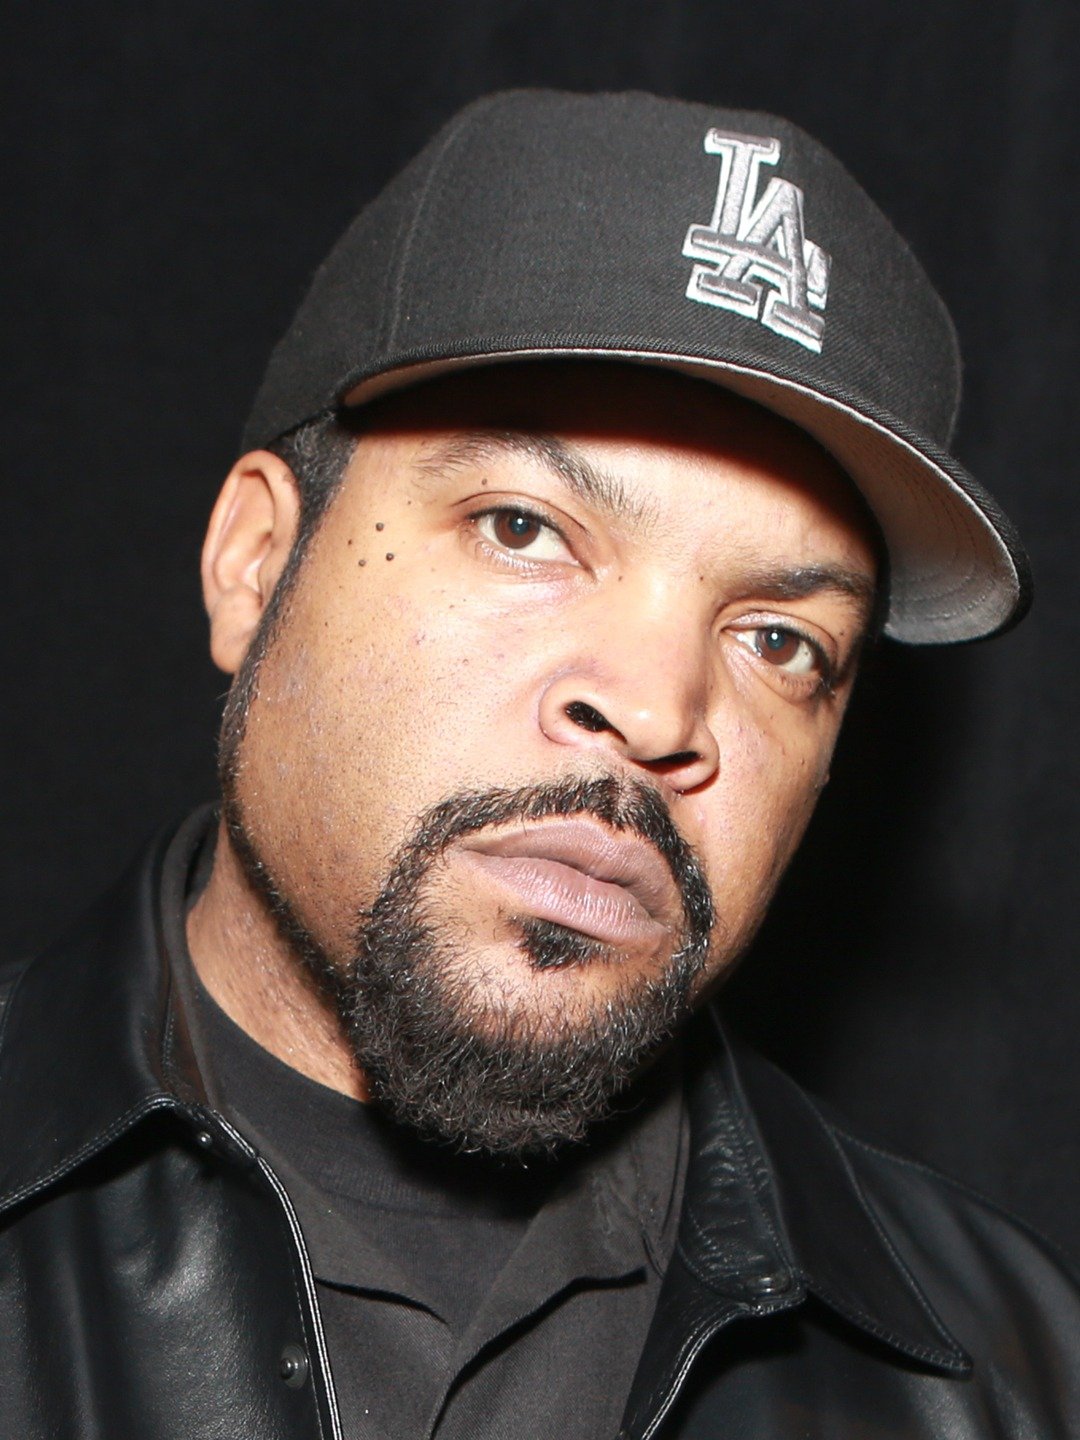 How tall is Ice Cube?